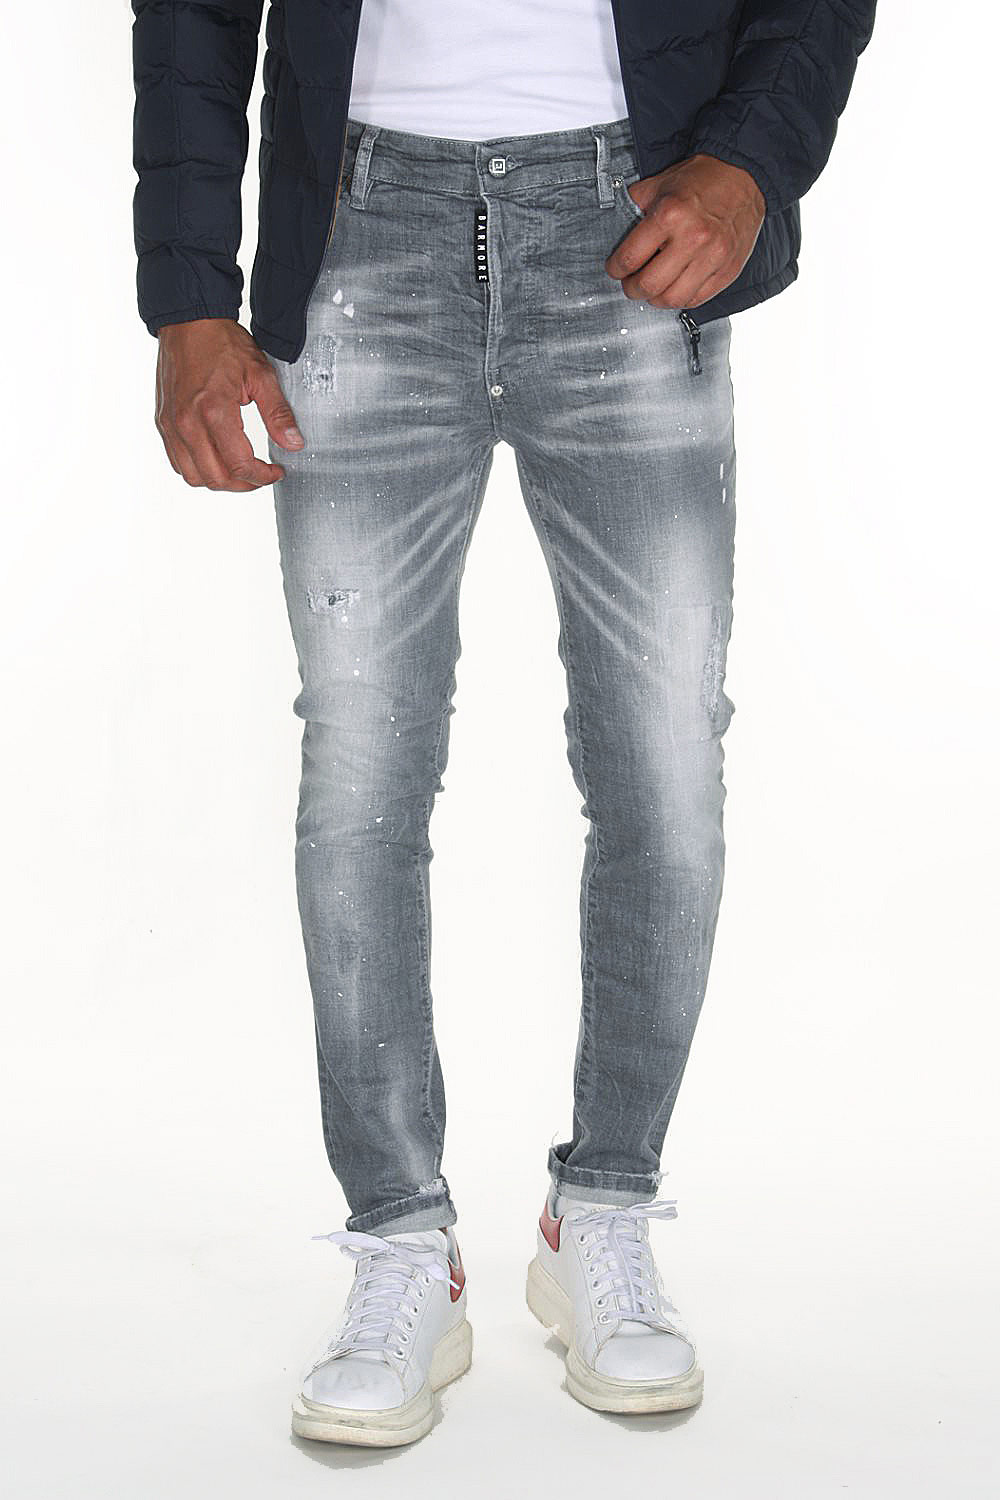 BARMORE jeans at oboy.com